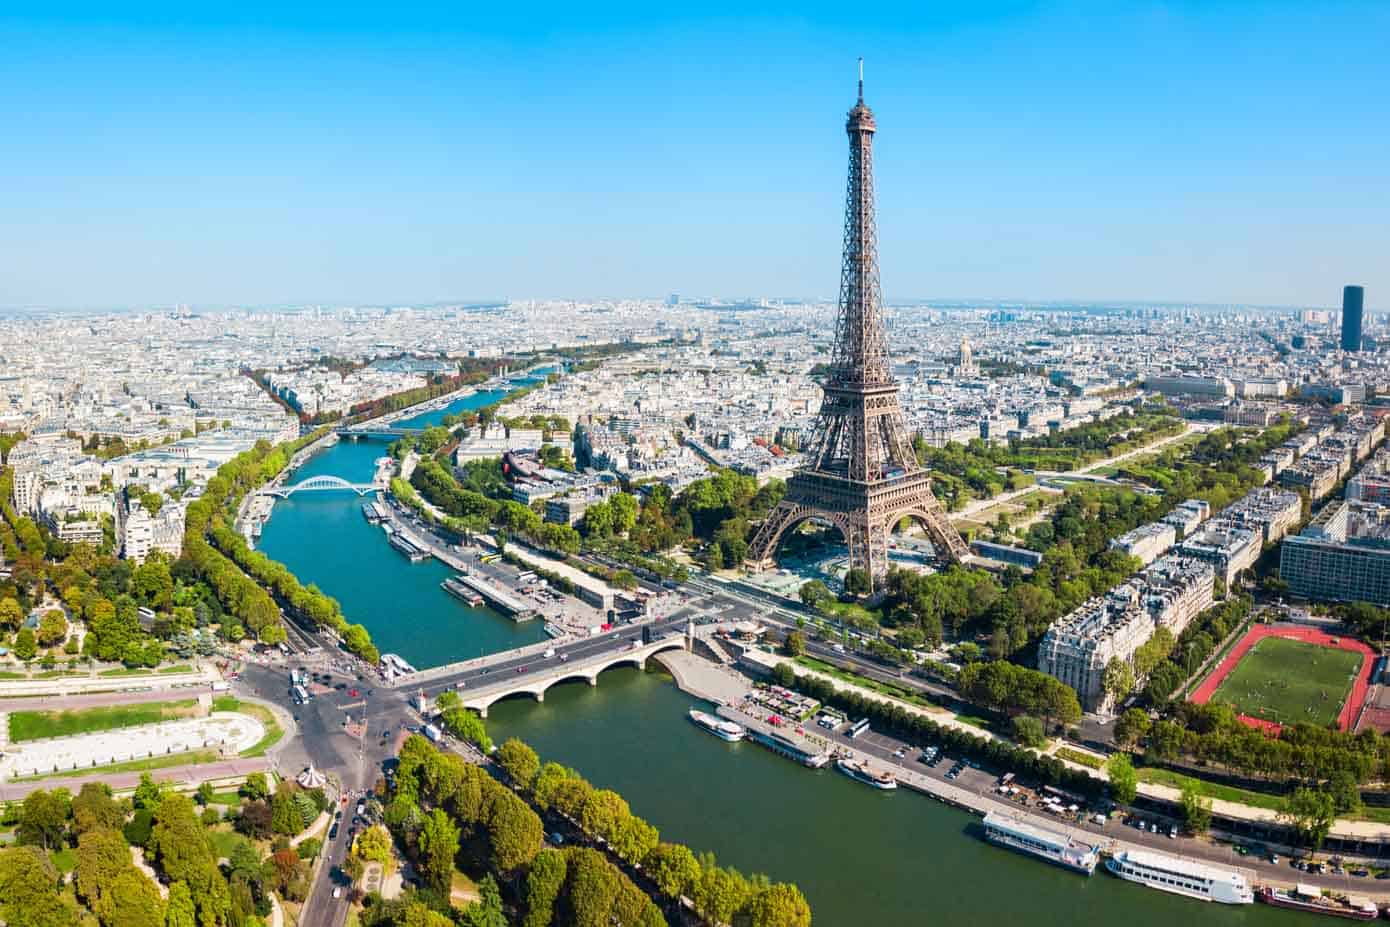 Aerial view of the Eiffel Tower and Seine River with city in the background in Paris, France.